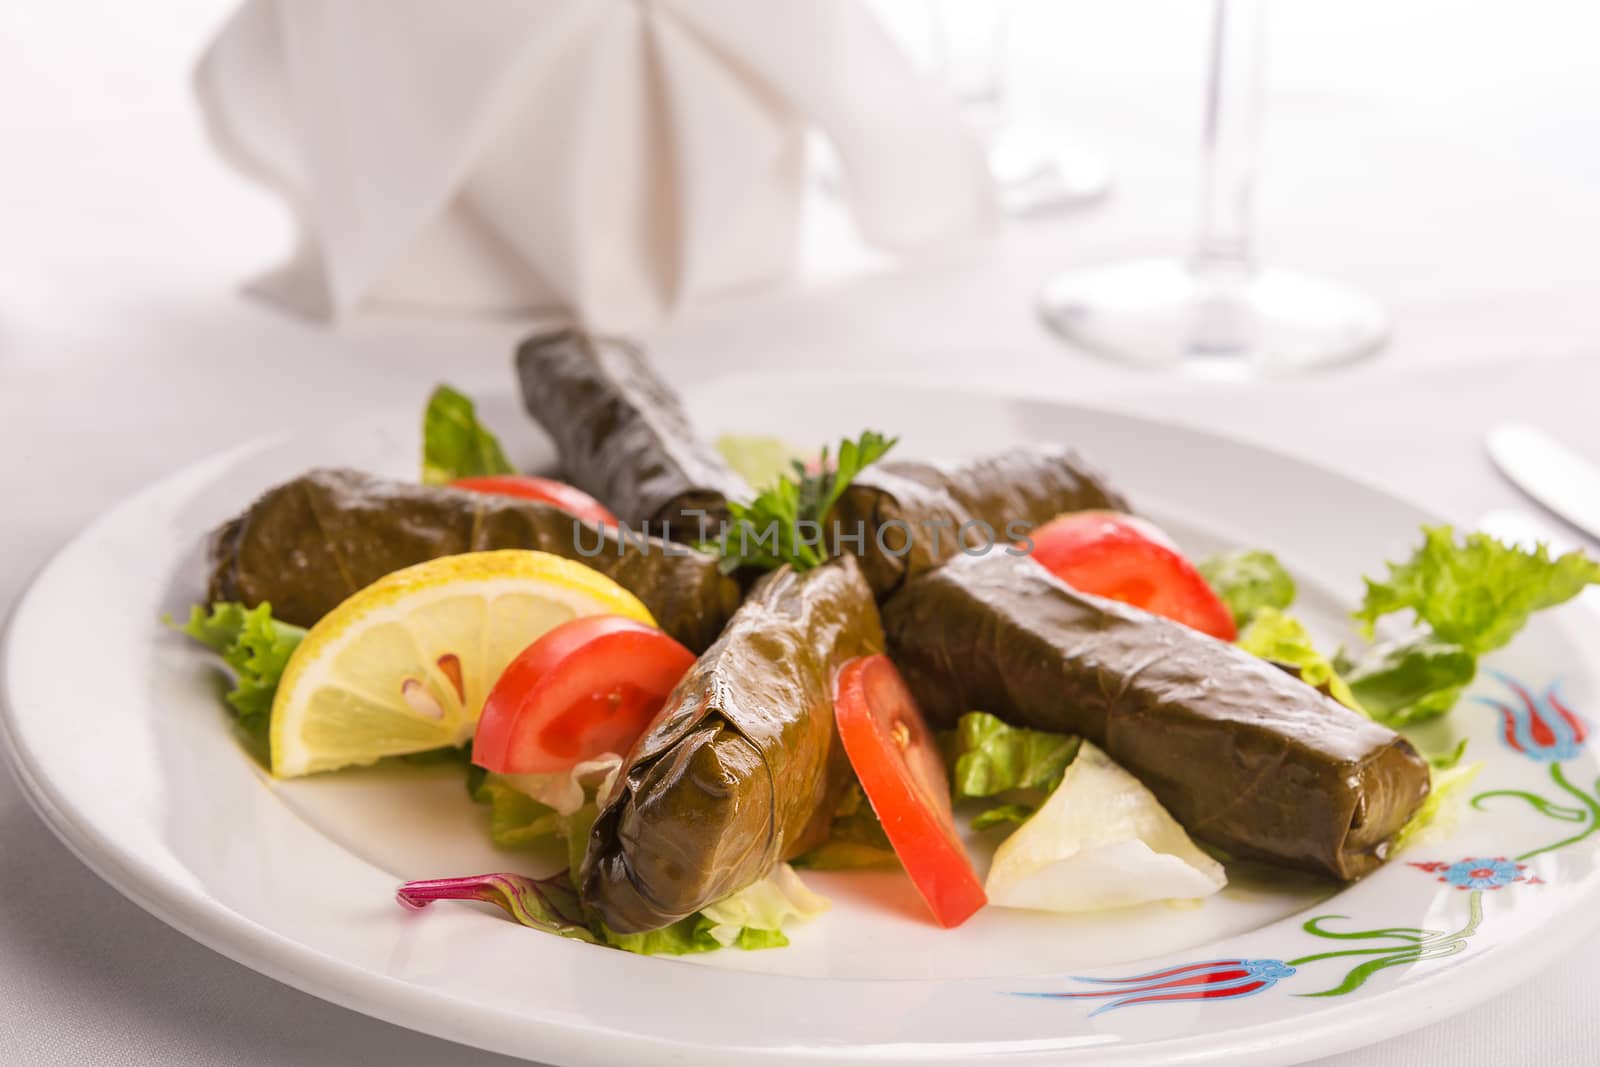 Turkish Style Dolmas Arranged with Tomatoes Lemon and Lettuce by coskun